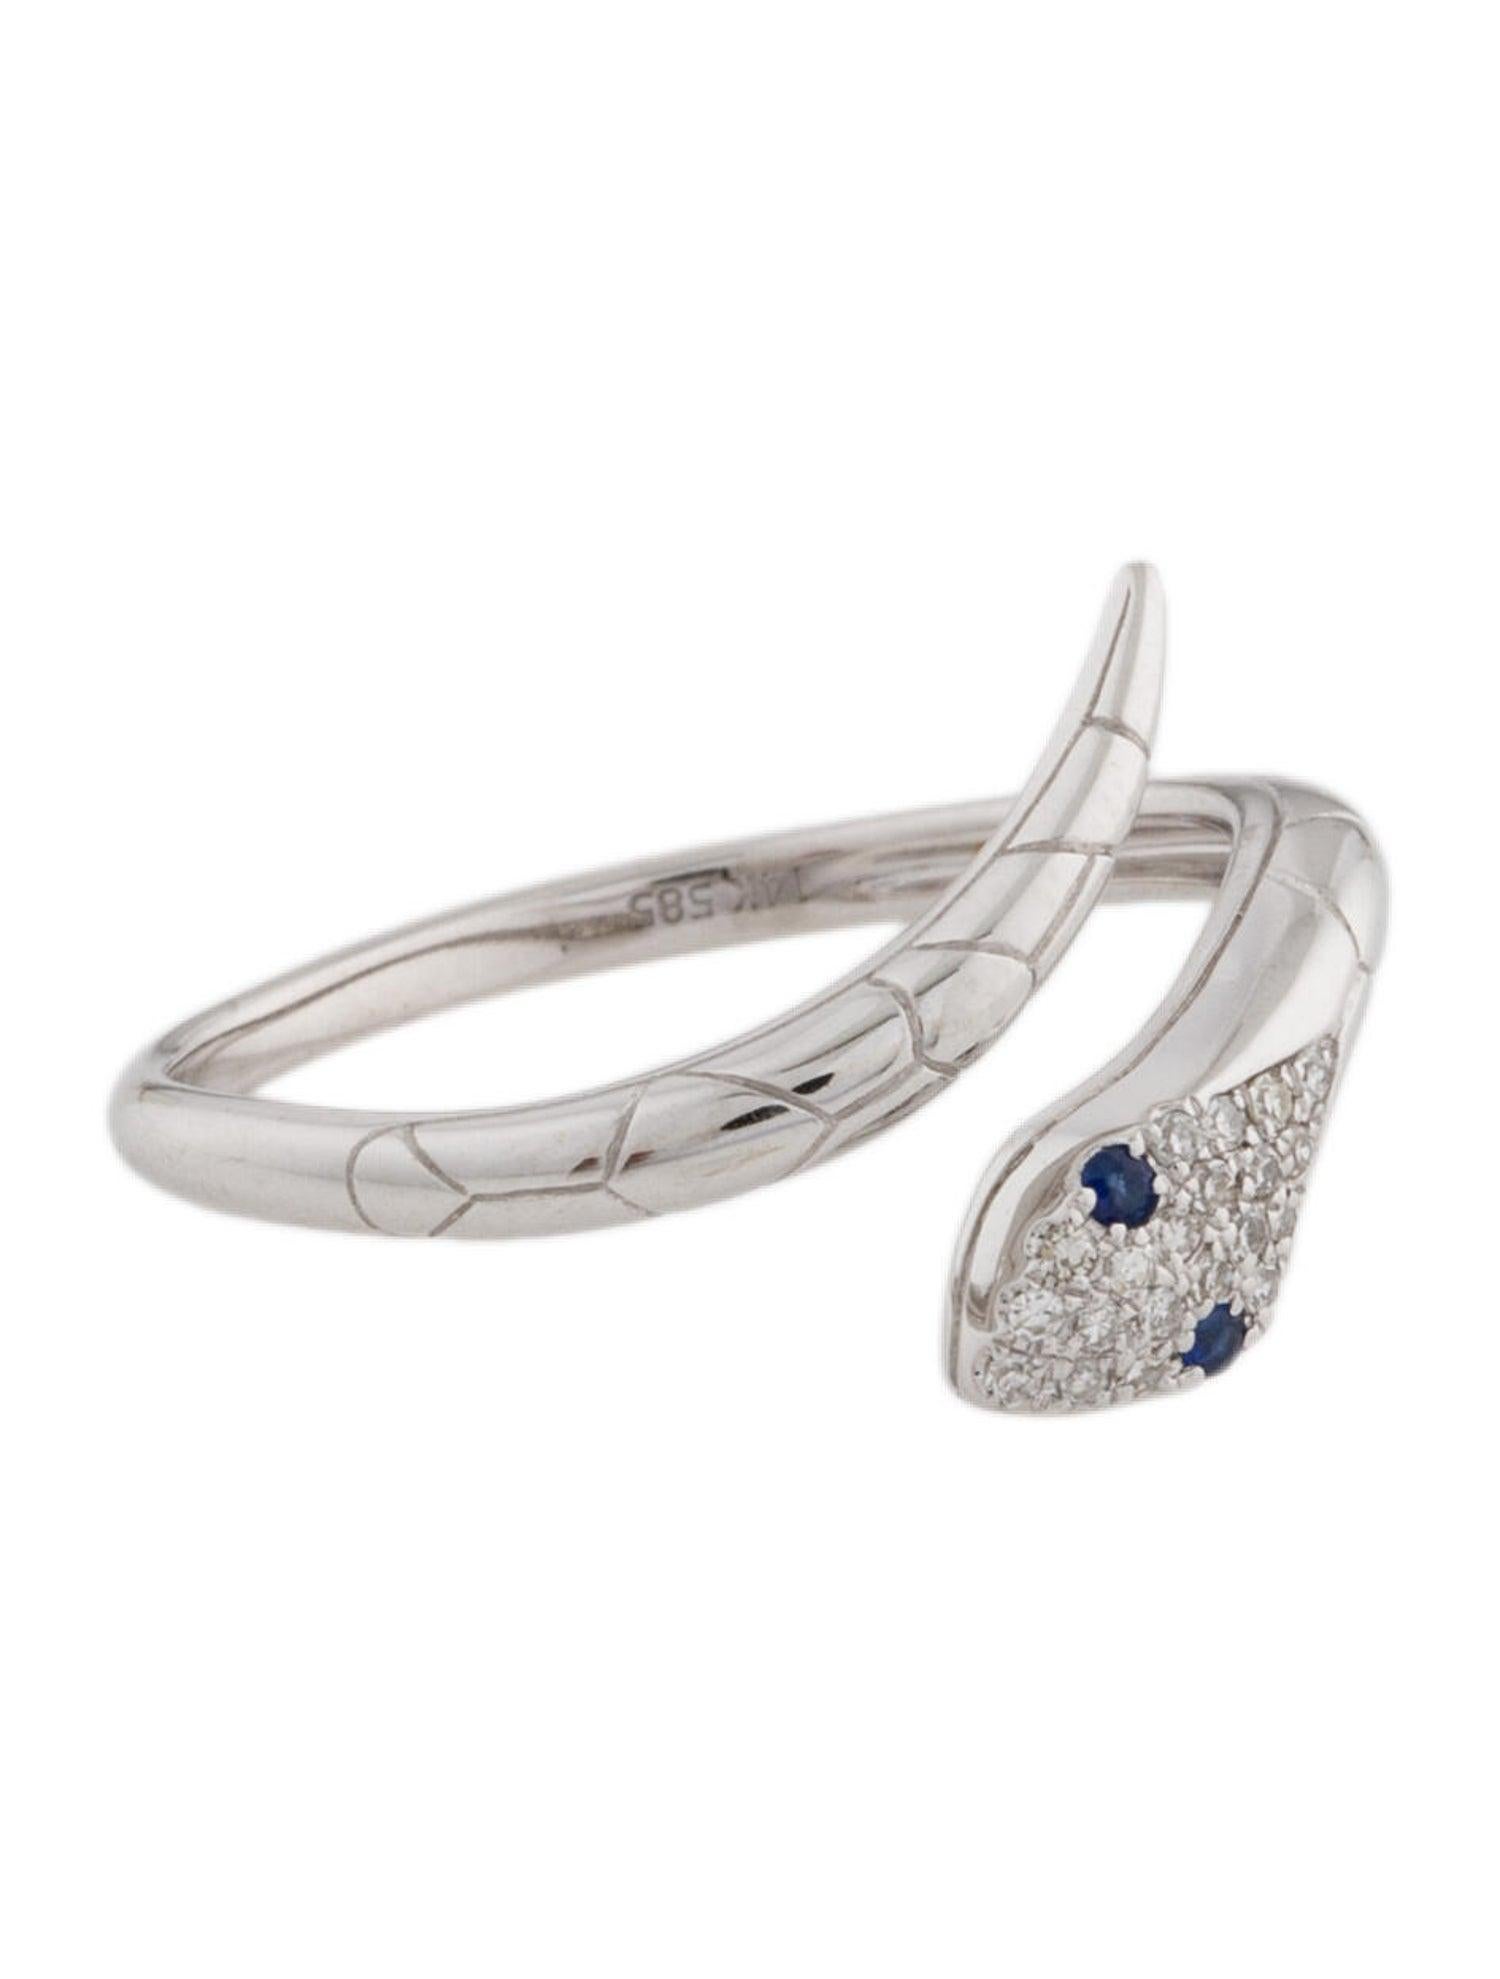 This Stunning and Charismatic Snake ring is crafted of 14K Gold and features approximately 0.06 ct. of Diamonds and 2 blue sapphires approximately 0.02 ct. Available in your choice of Yellow, Rose or White Gold. Wraps Gracefully around your finger